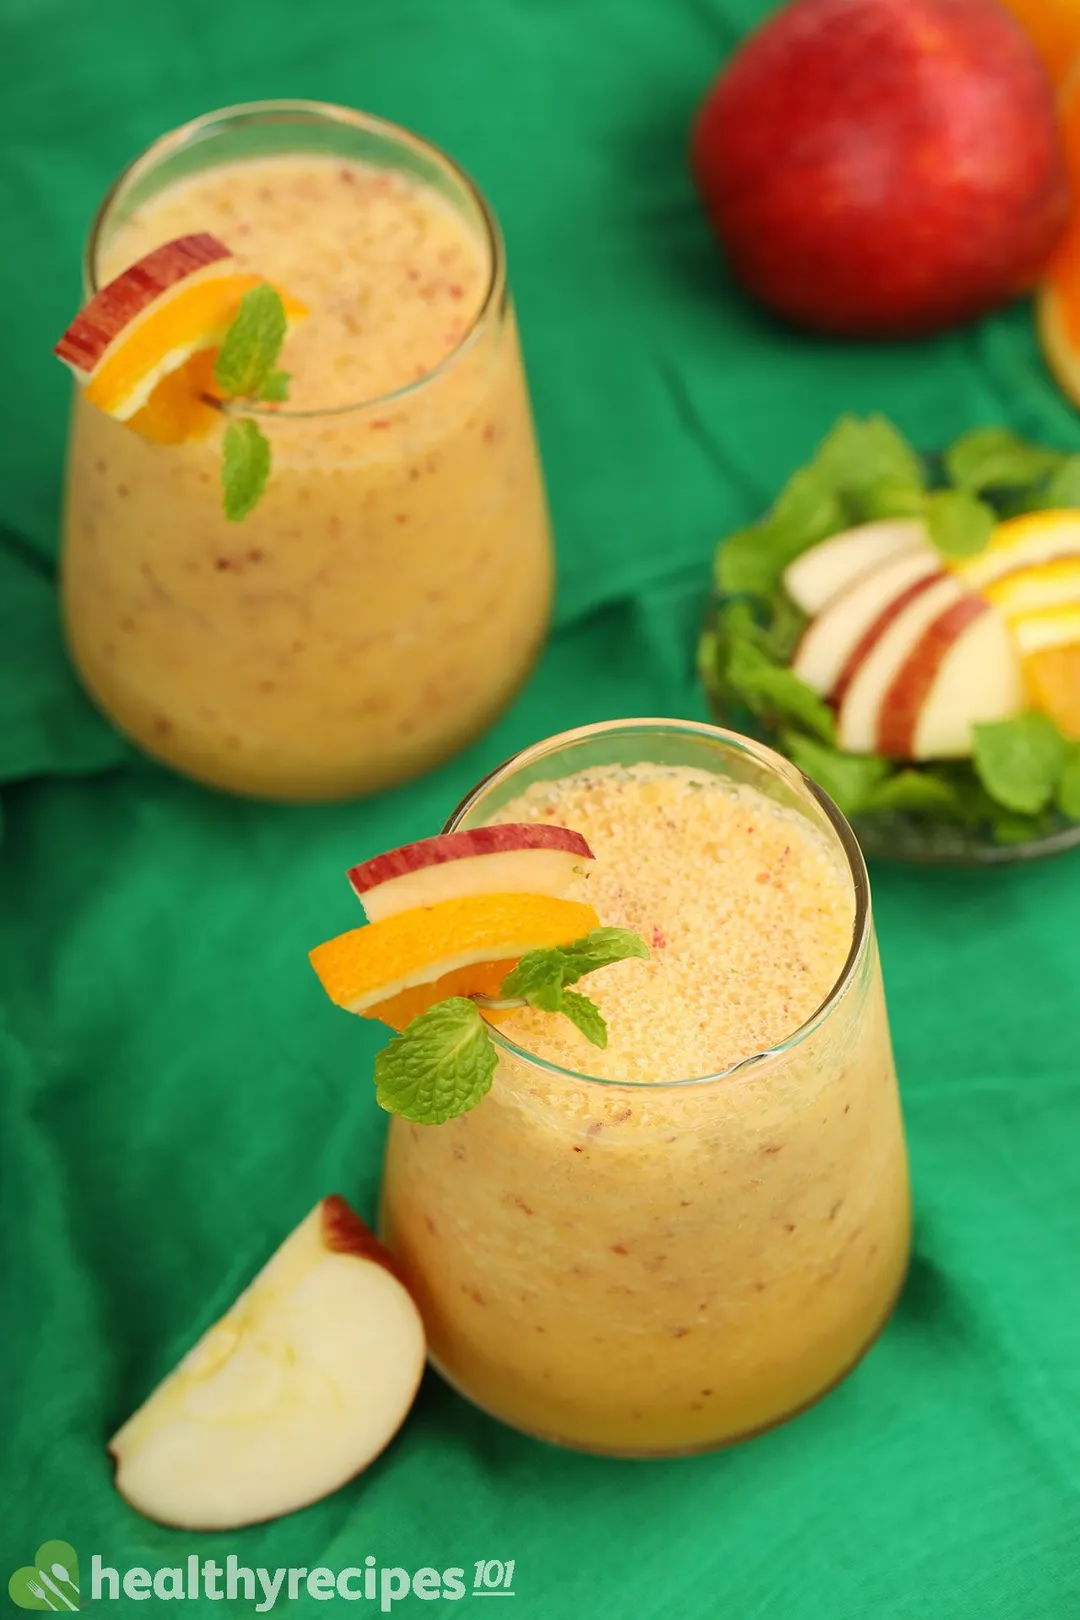 Two glasses of apple orange smoothie and a plate of apple slices laid on a green cloth.